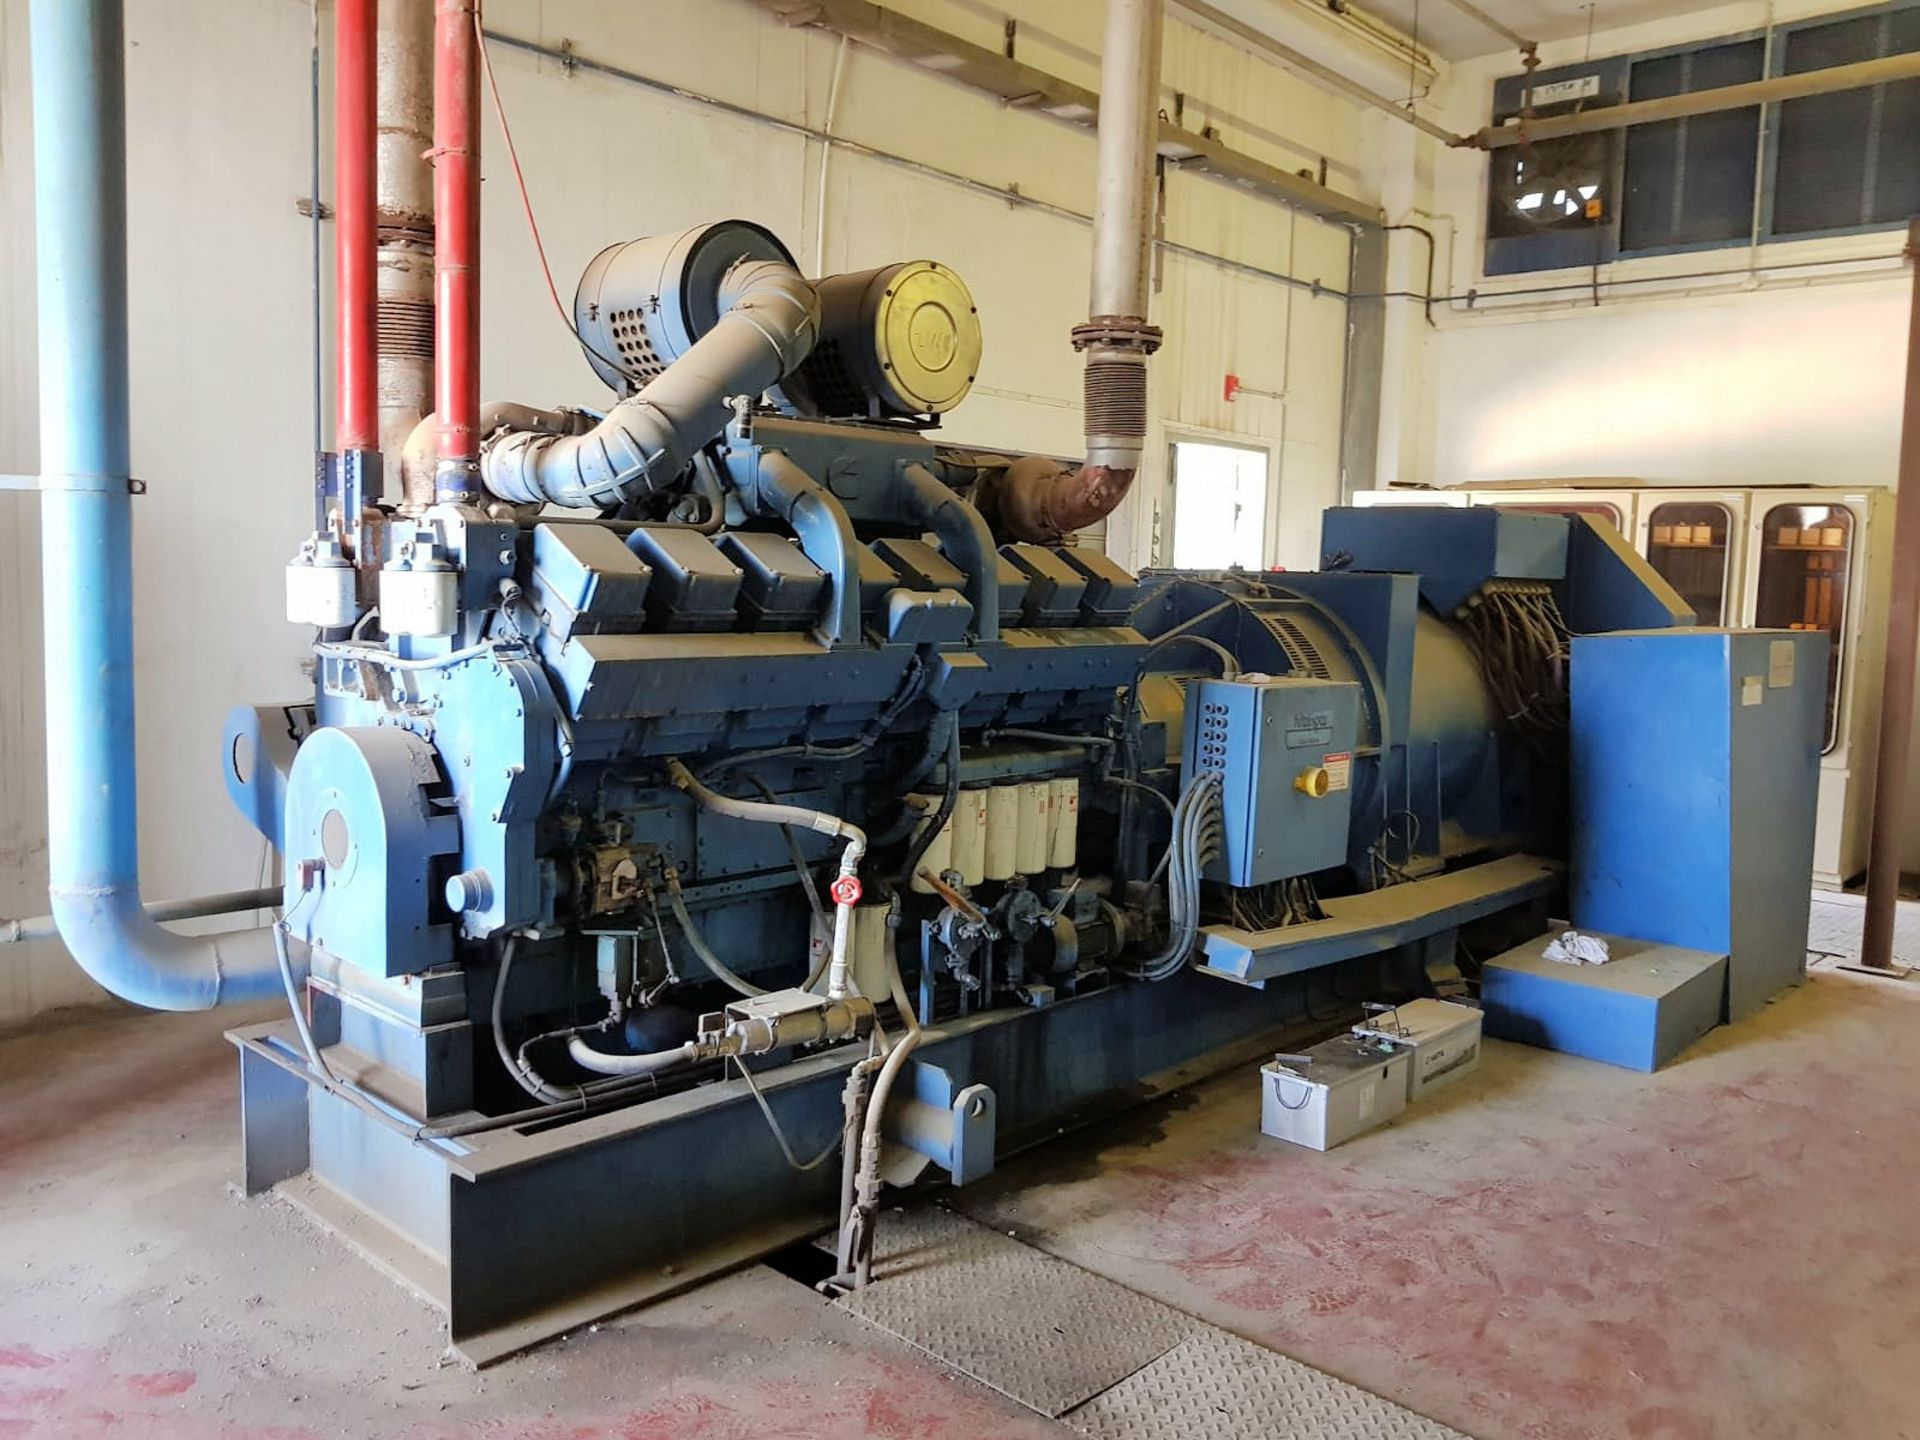 1 x 1987 Hitzinger SGS 9D 040 Generator - Only 800 Hours Use - Ref: T4UB/HZ - CL333 - Location: